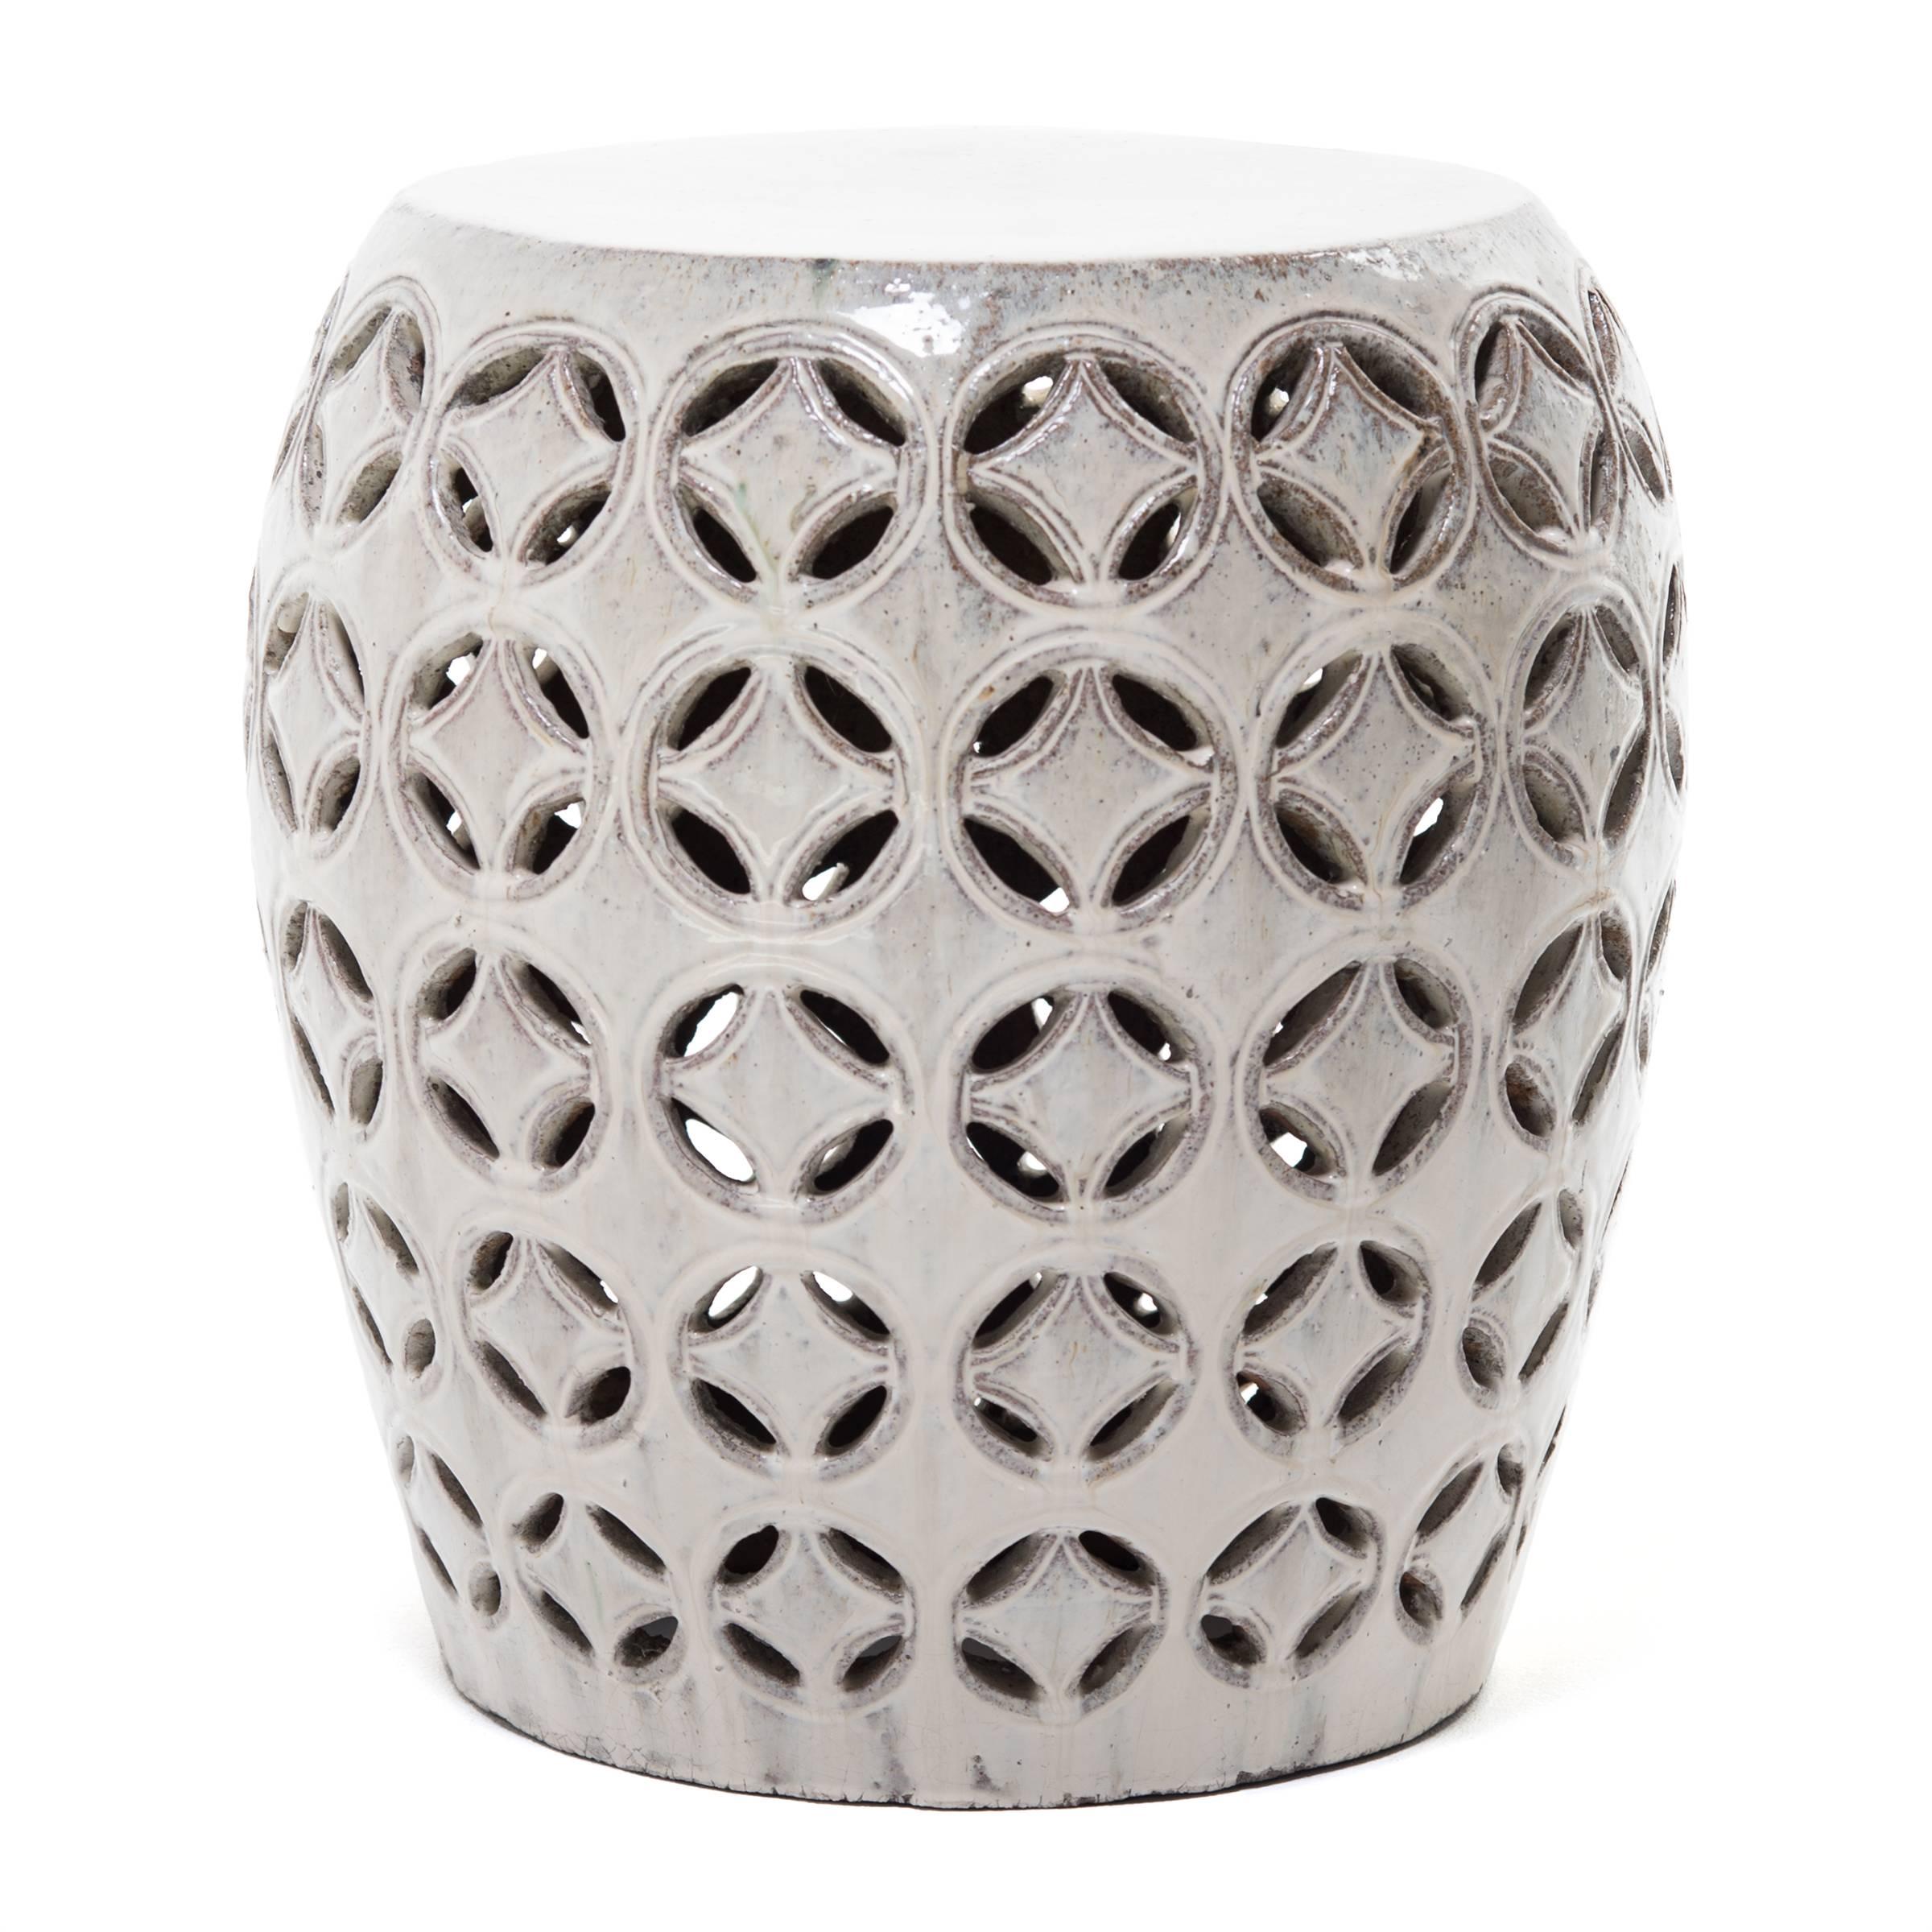 This ceramic garden stool is from China’s Jiangxi Province, and is a modern interpretation of a Classic design: the rich white glaze enhances the artistry and elegance of the form. The coin motif is an ancient symbol of good fortune. Garden stools